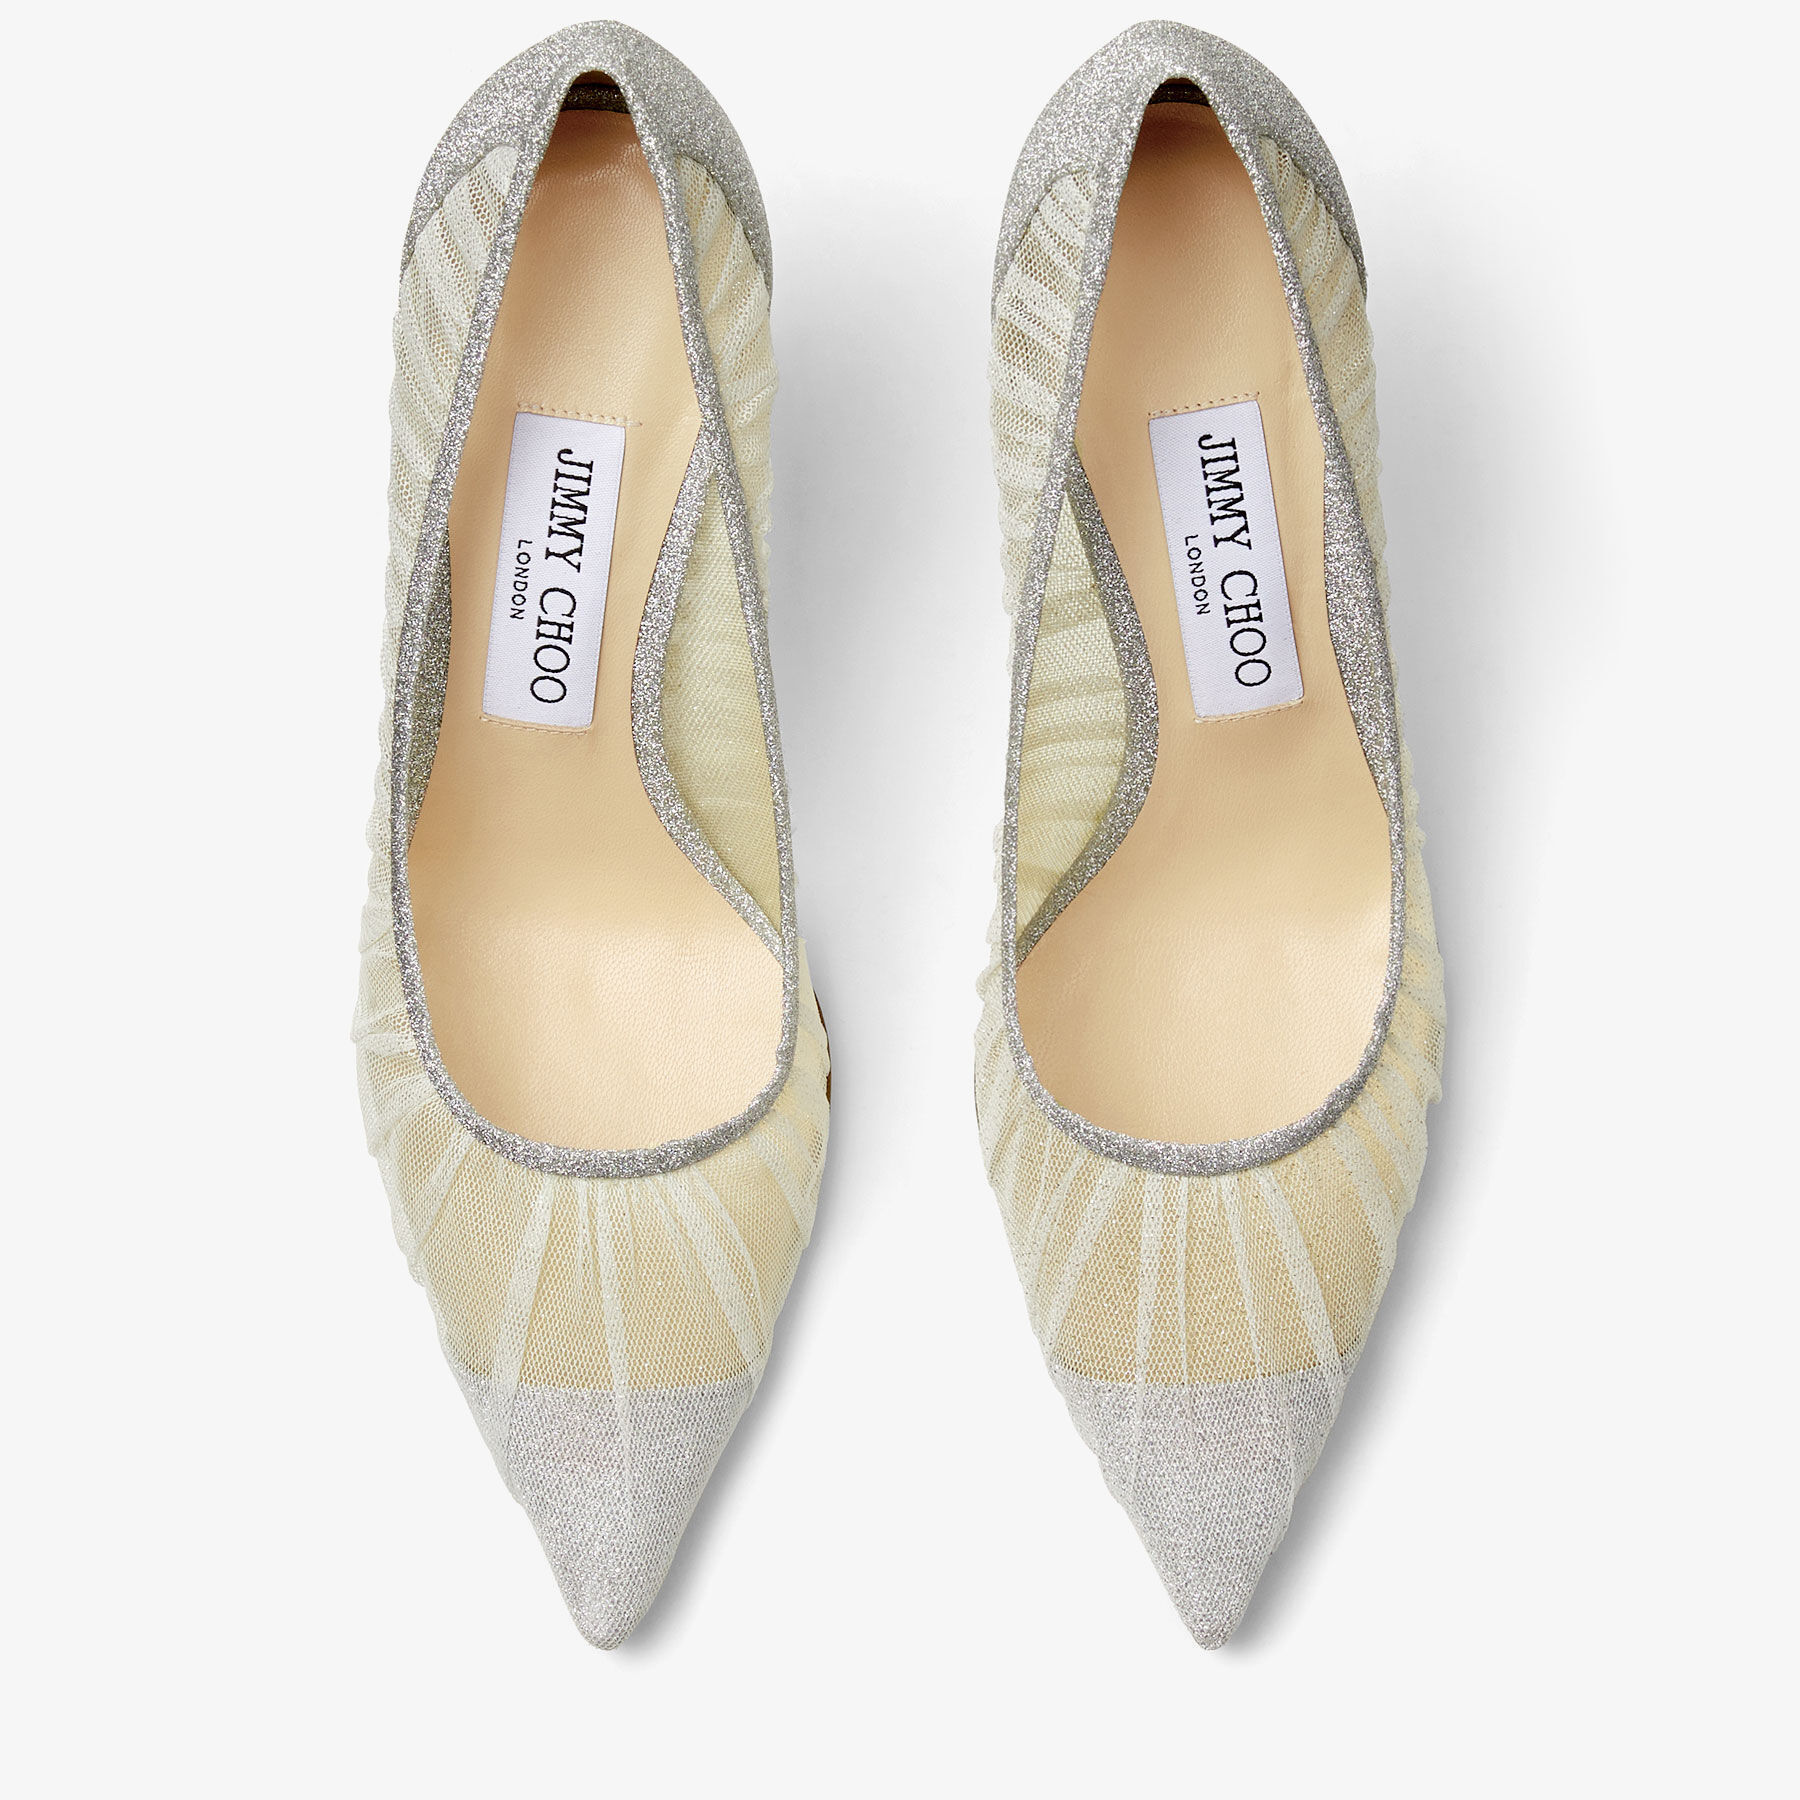 Metallic Silver Glitter Fabric Pumps with Ivory Tulle Overlay 